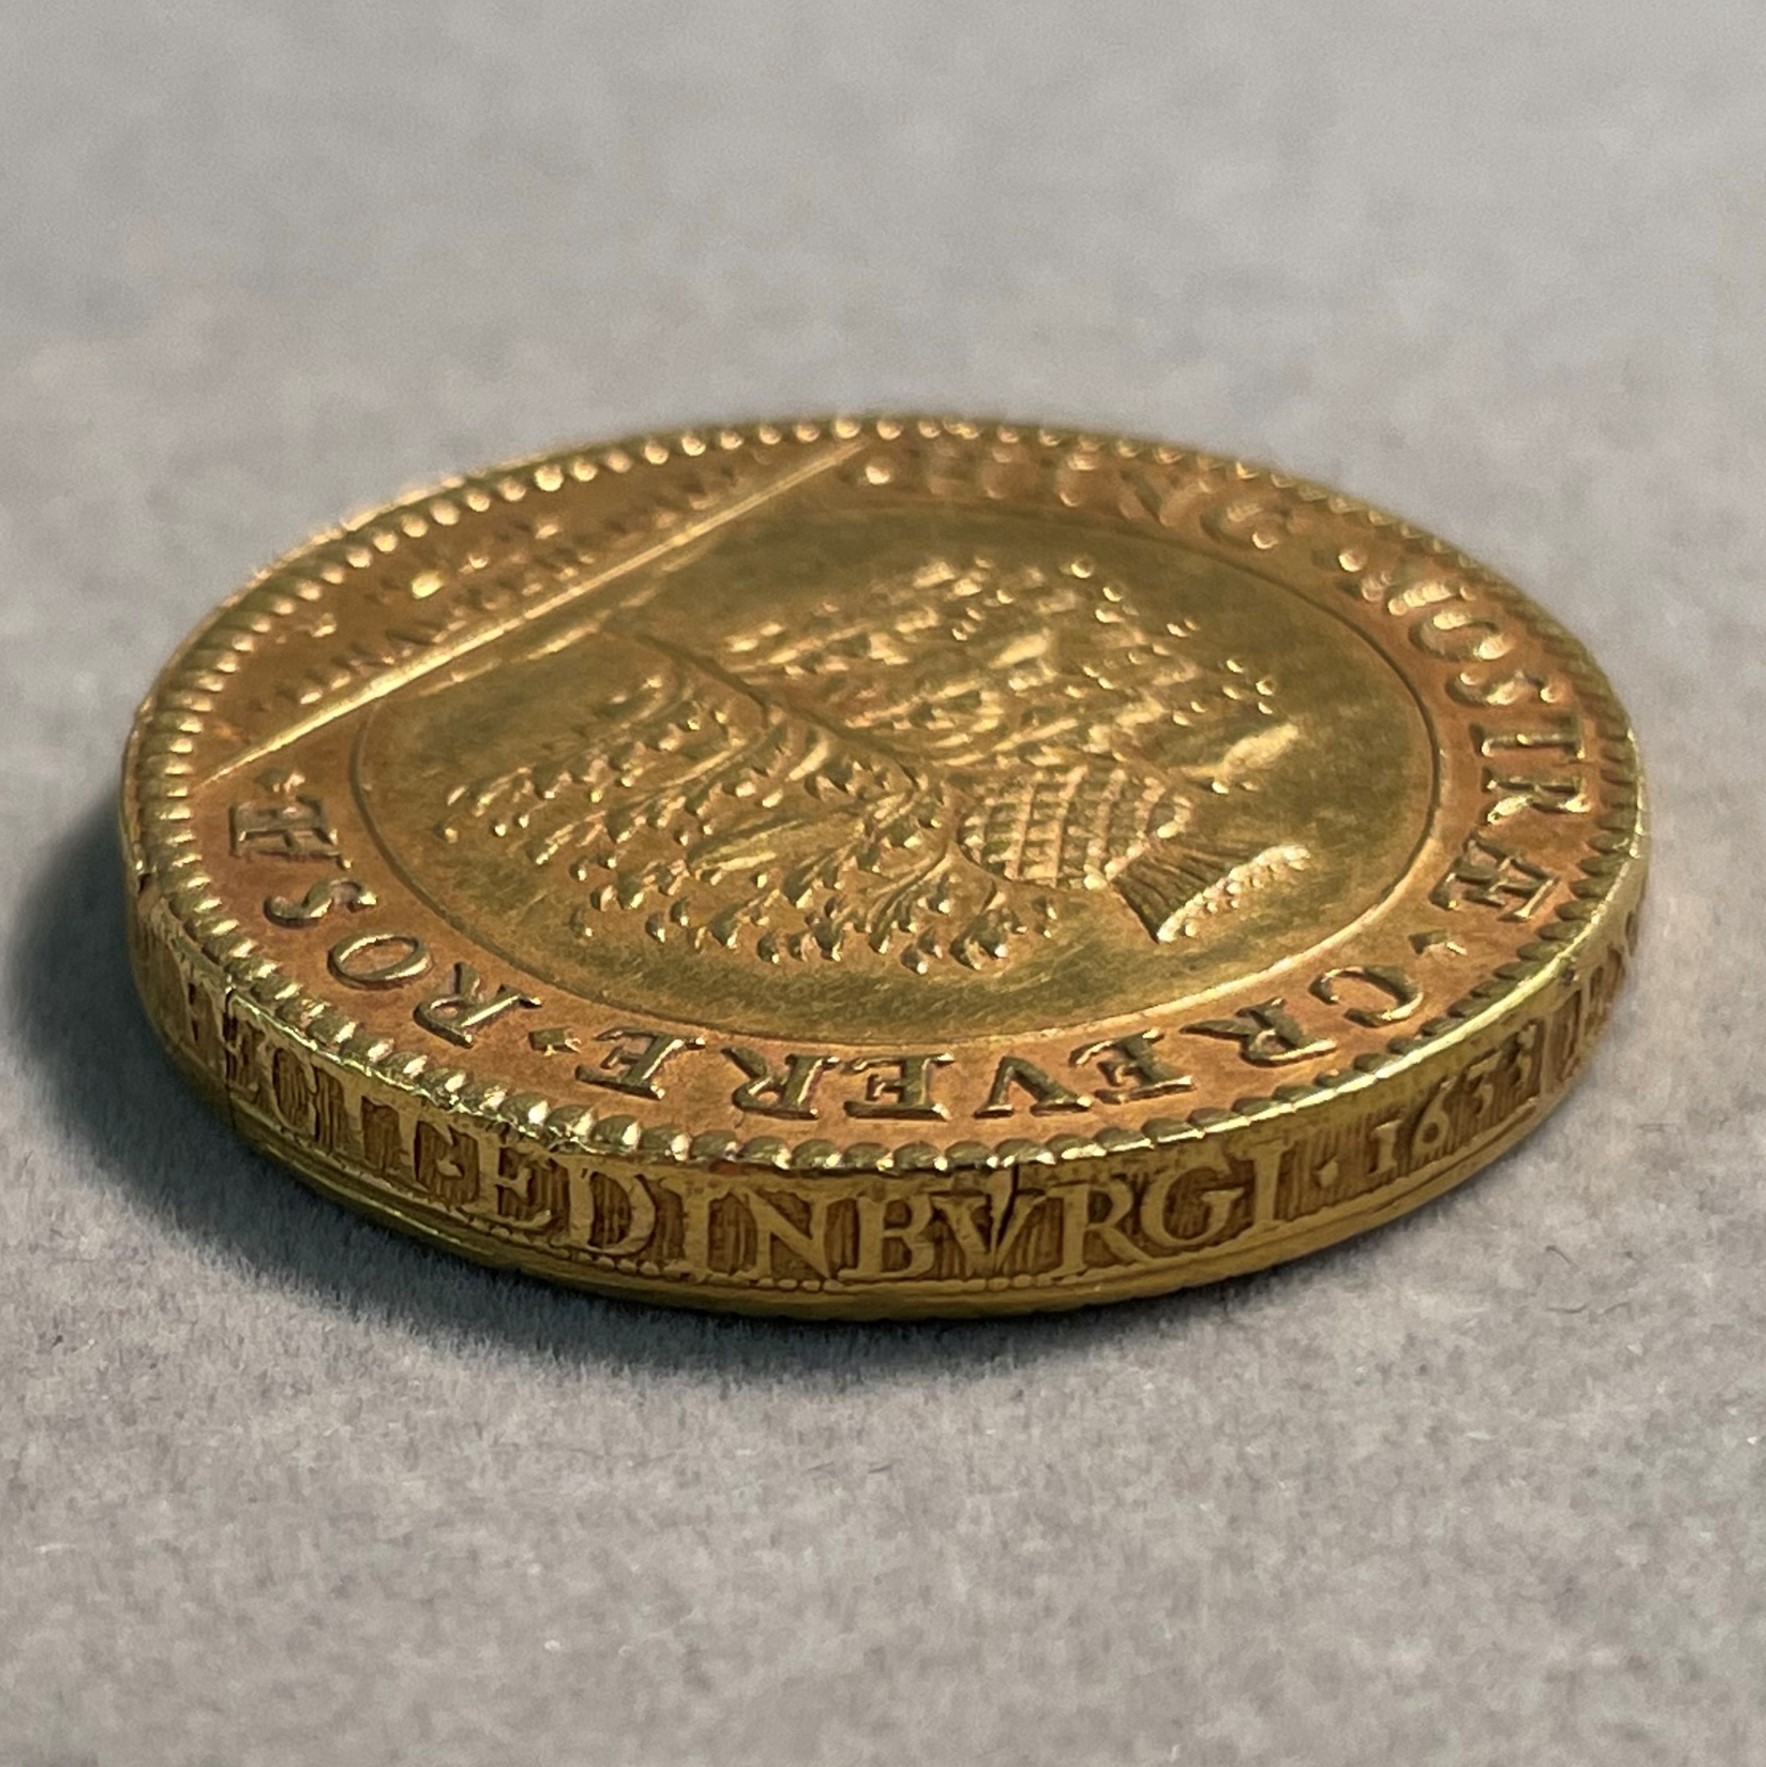 A close up image of a gold coin.